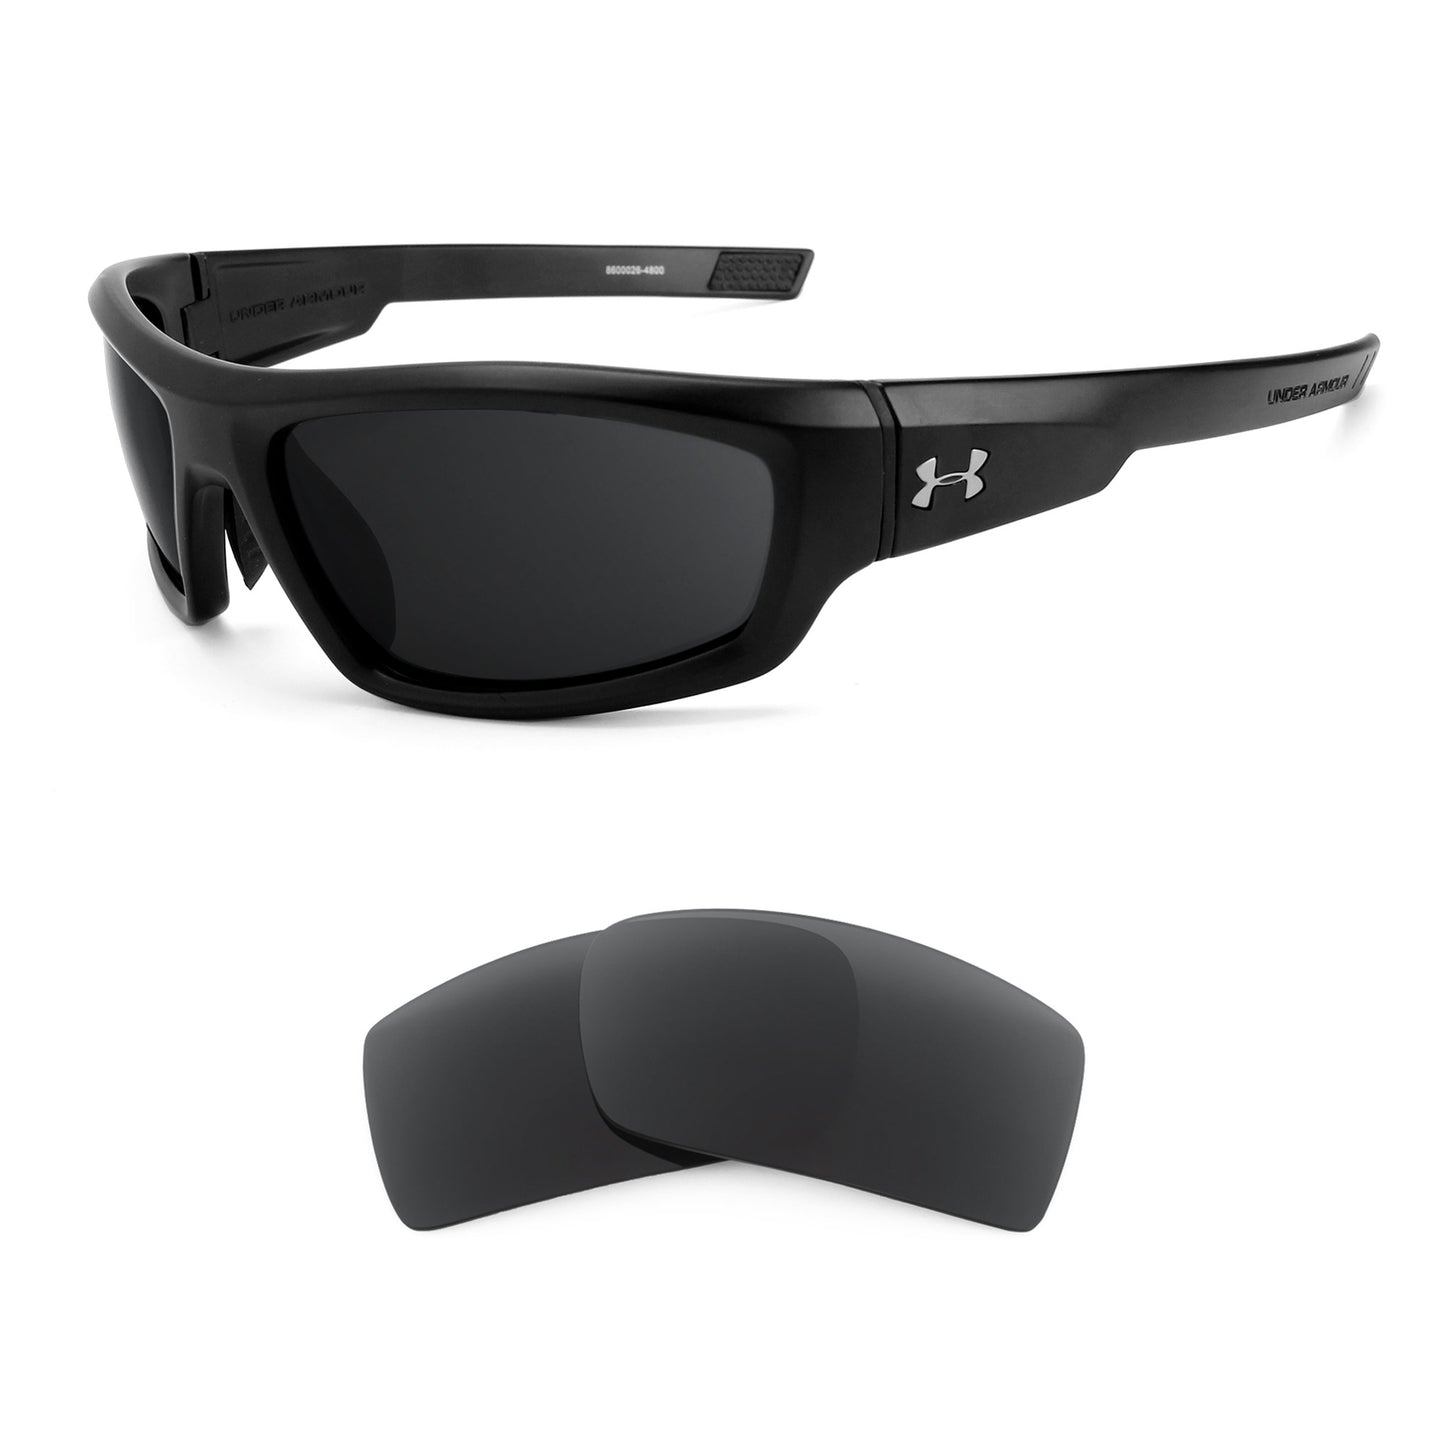 Under Armour Power sunglasses with replacement lenses